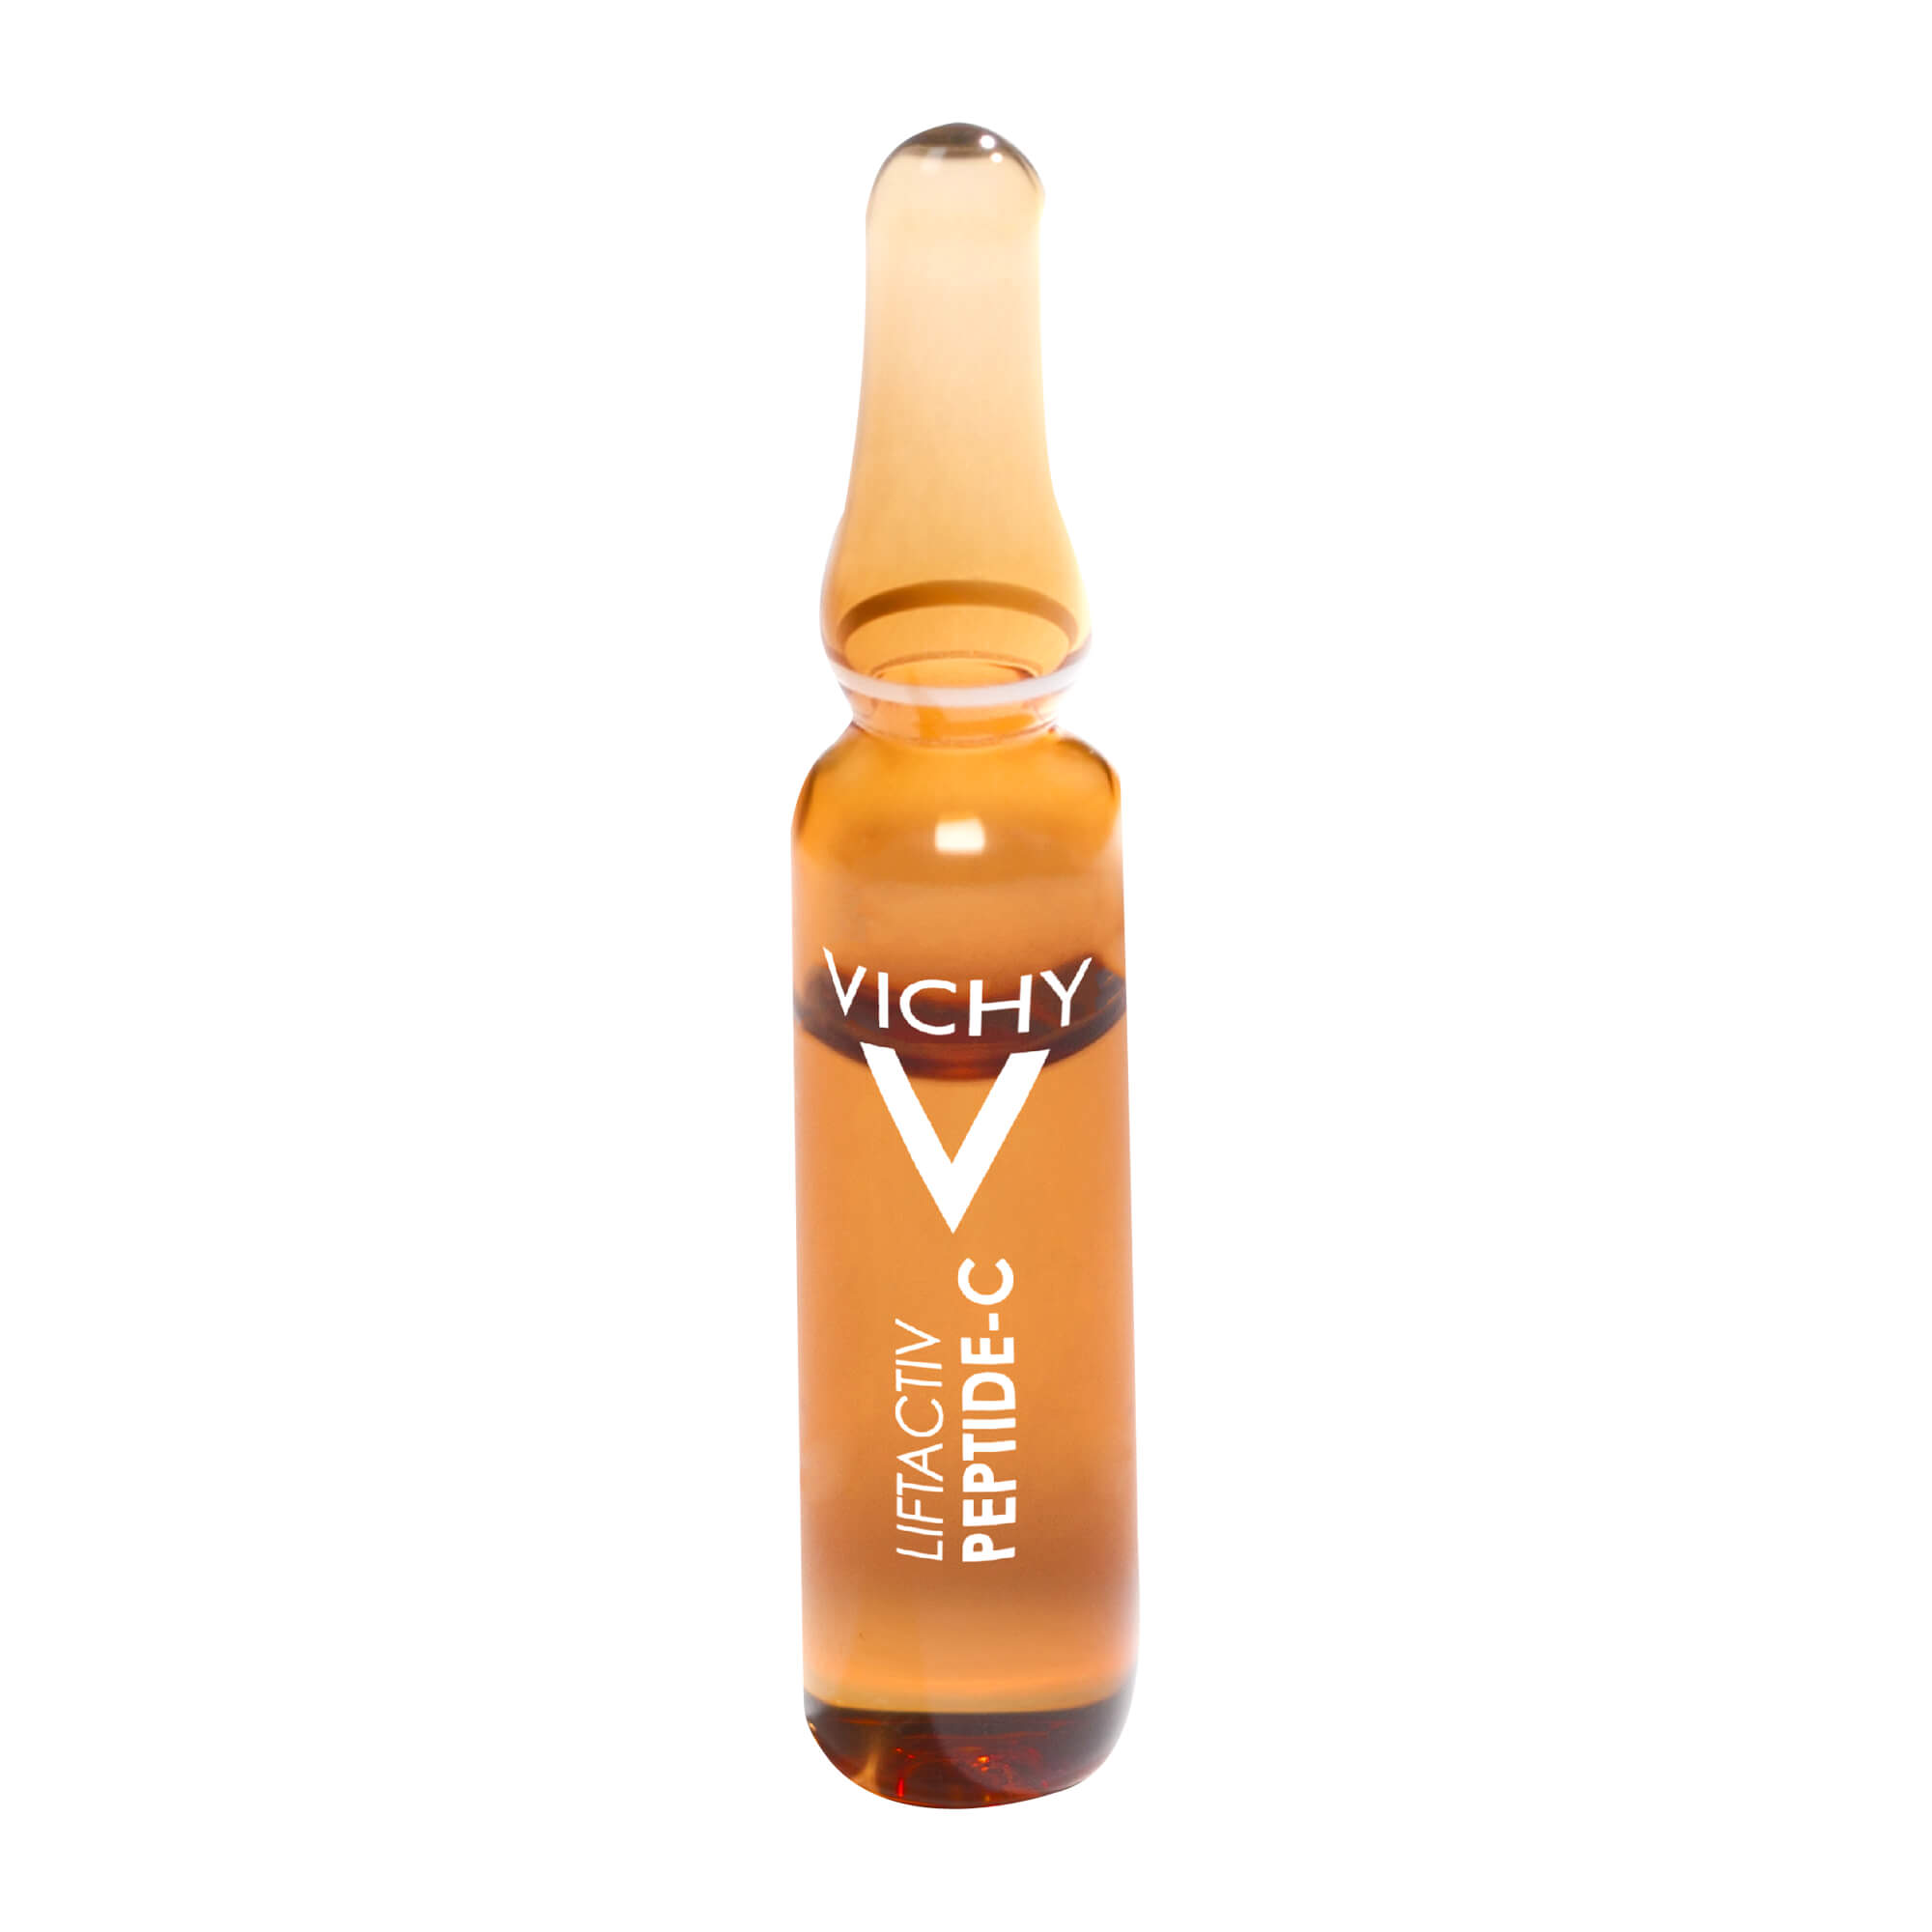 Vichy Liftactiv Specialist Peptide-C Anti-Aging Ampullen